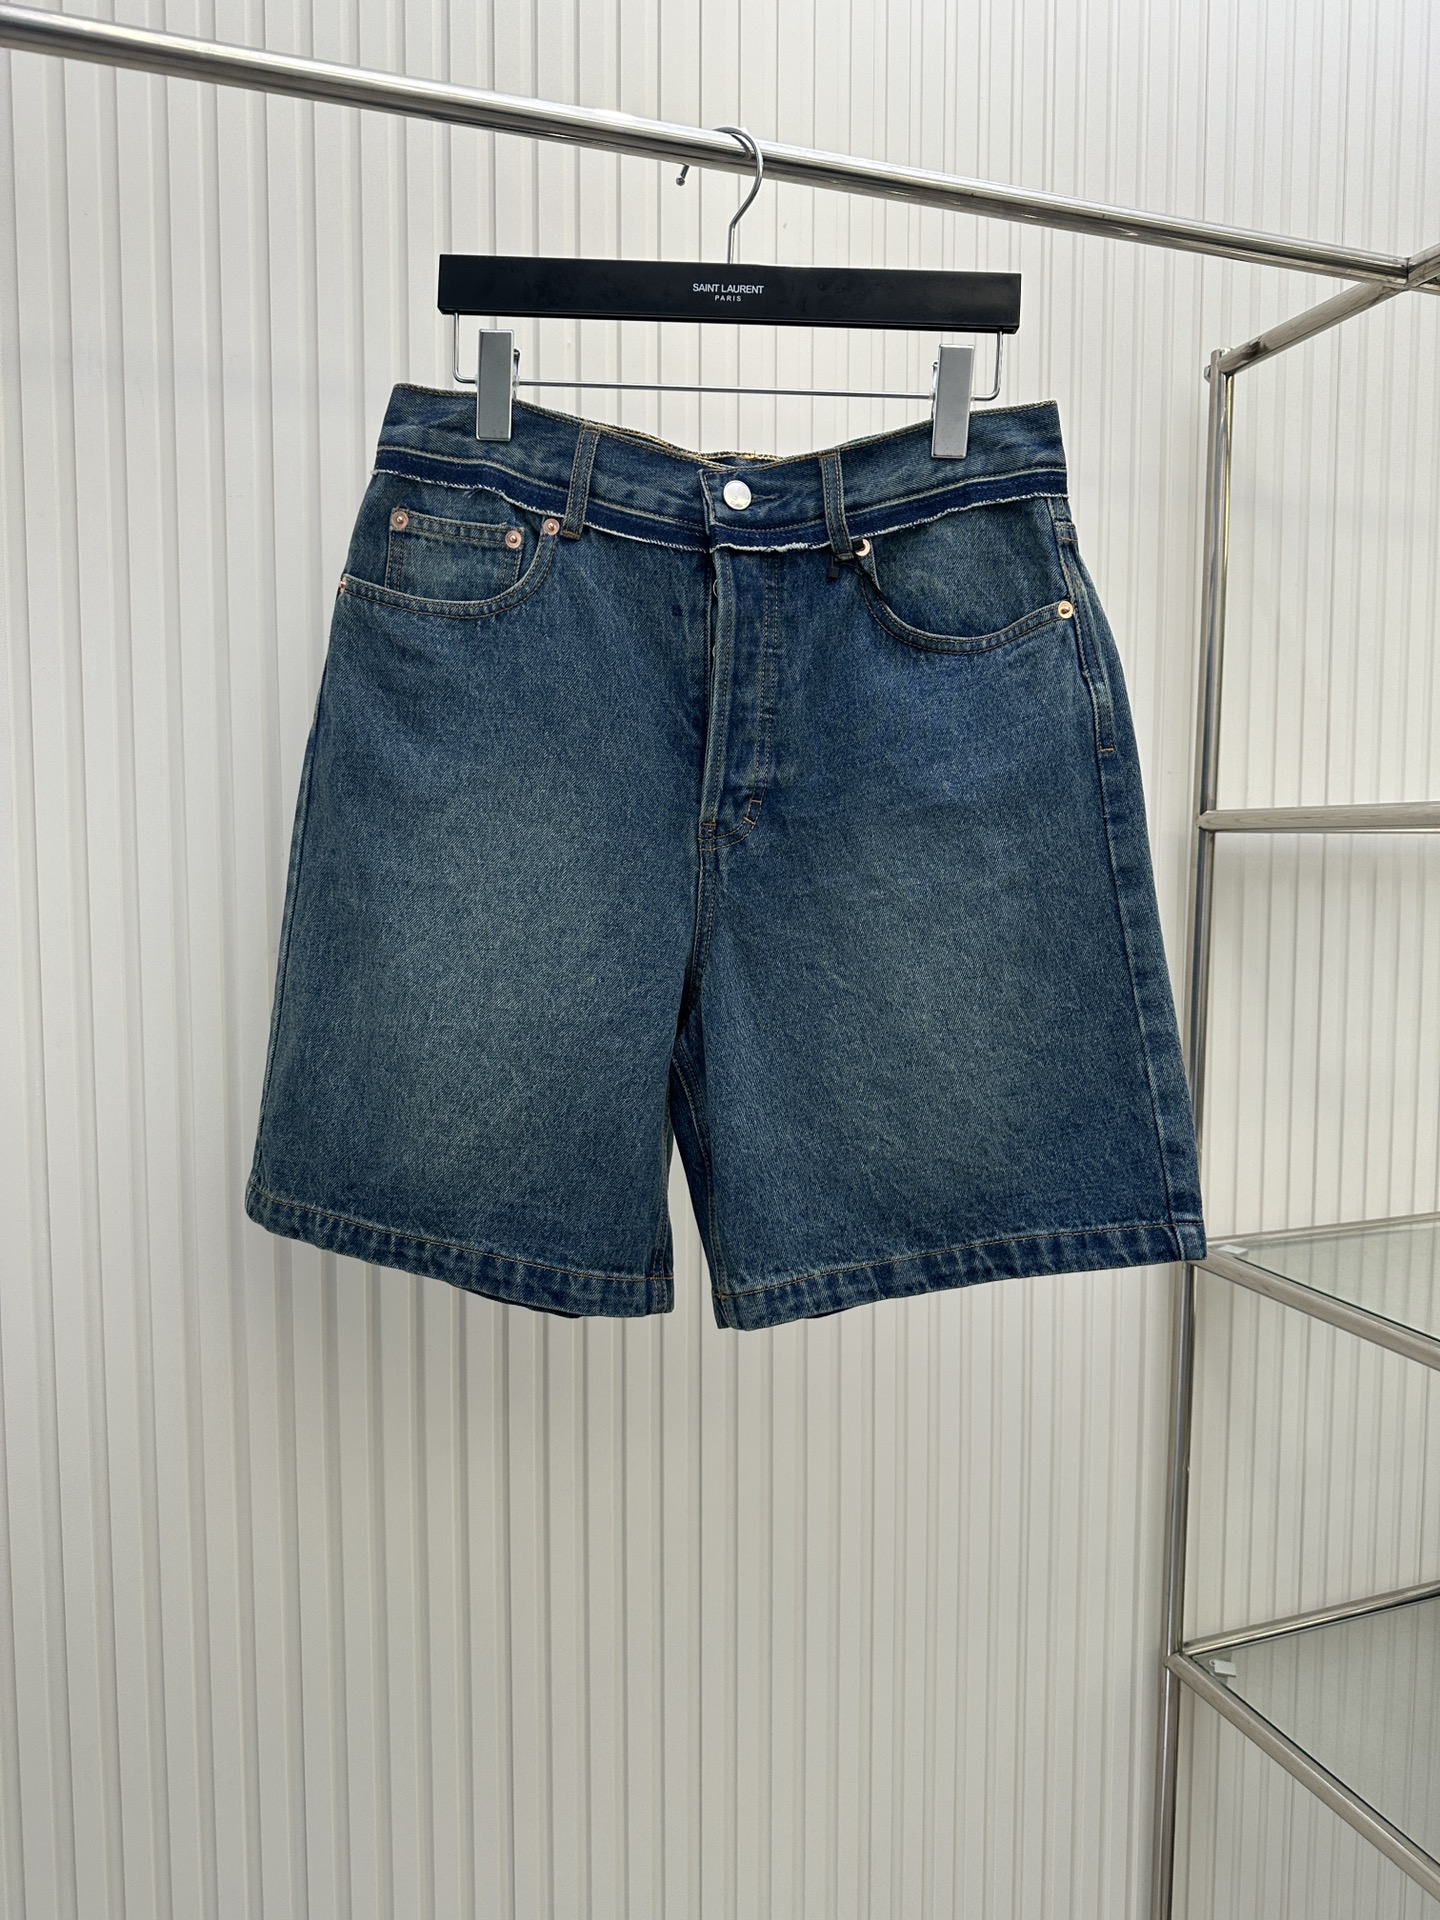 Gucci Clothing Jeans Shorts